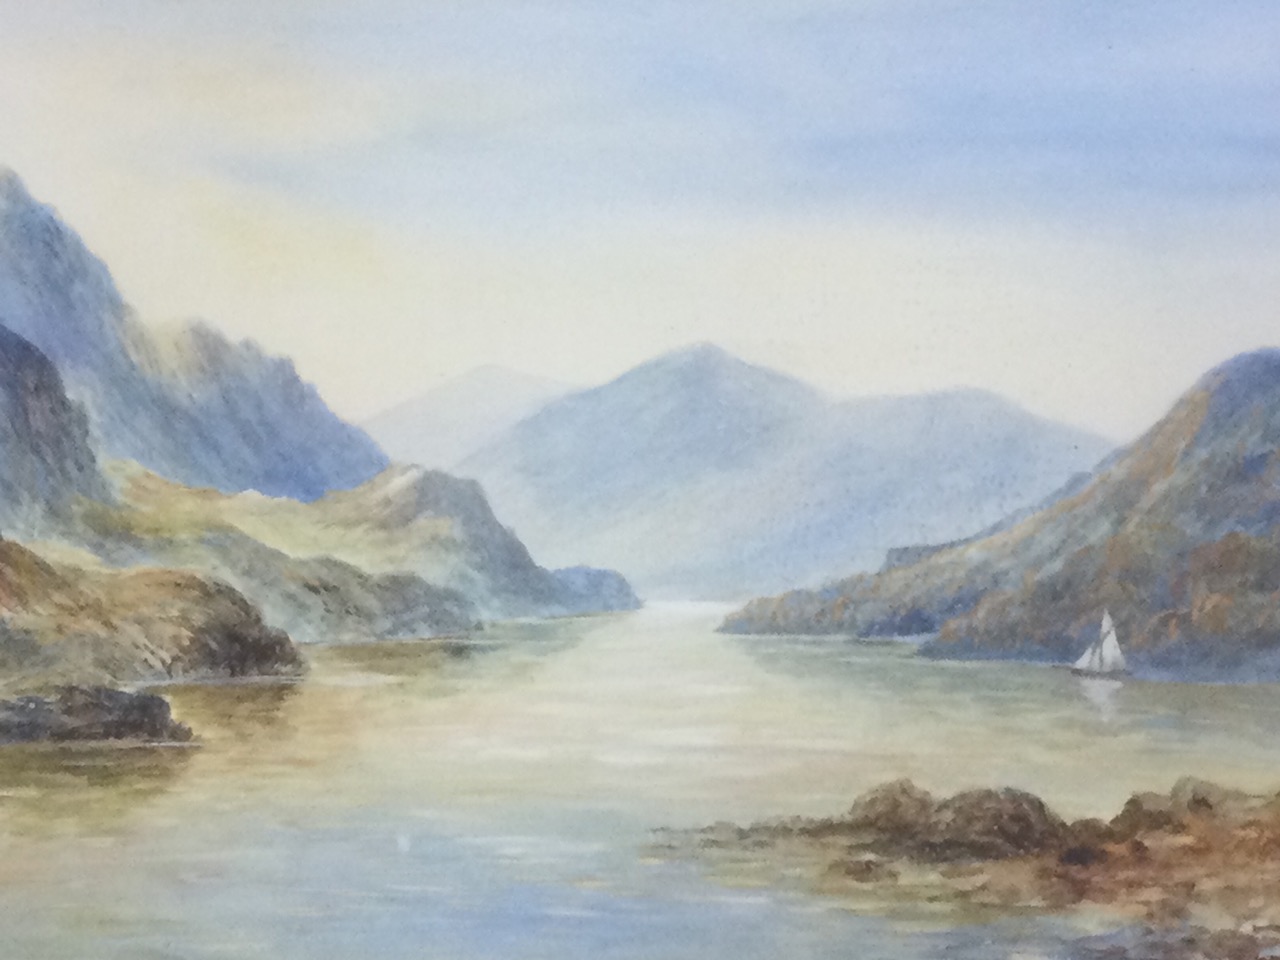 J Douglas, watercolour, coastal view with sailing boat, signed, attributed as Kyles of Bute, mounted - Image 3 of 3